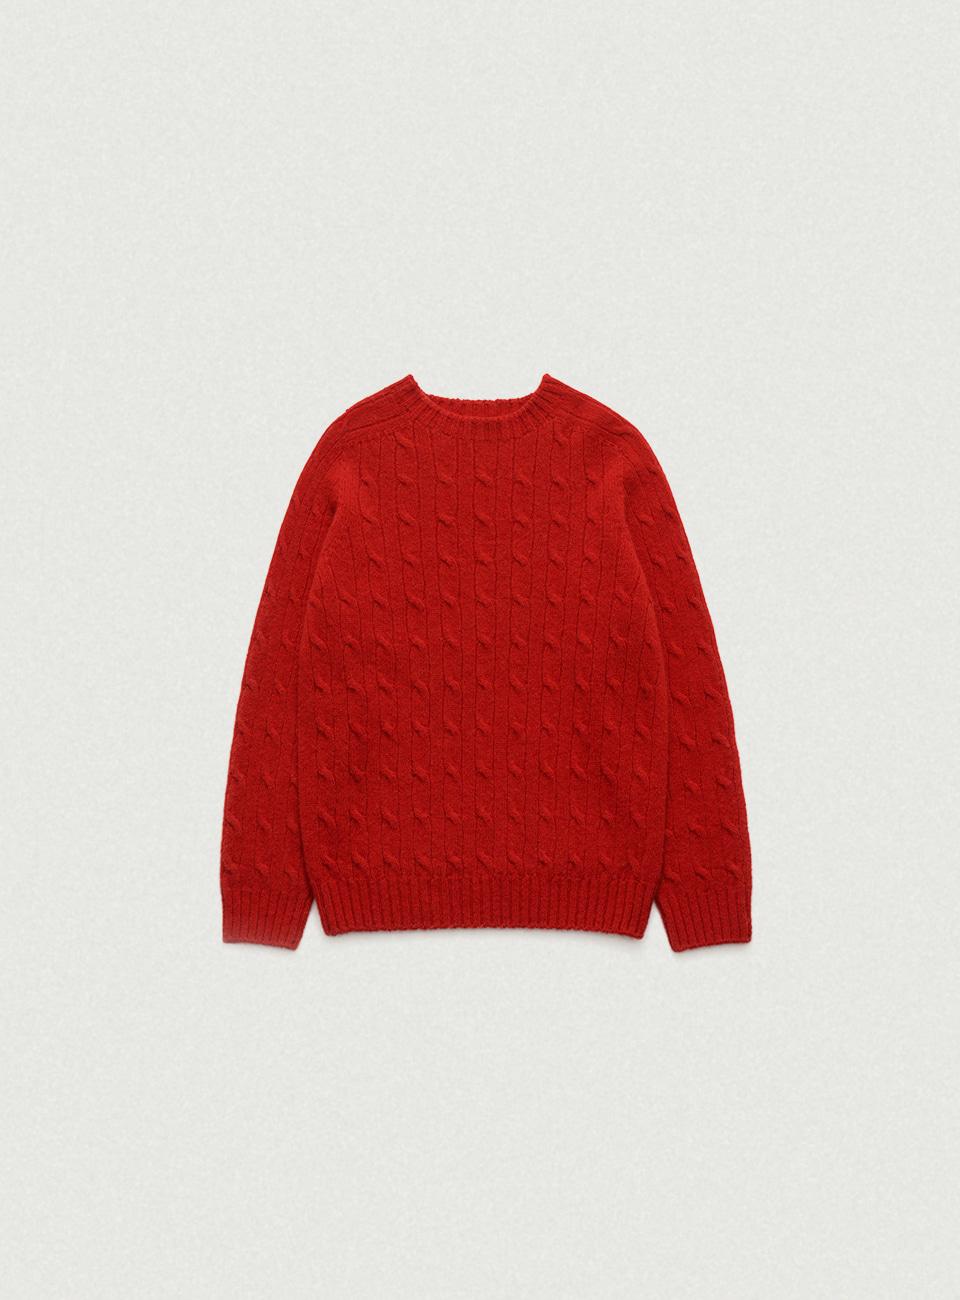 Red Shaggy Dog Knit Sweater